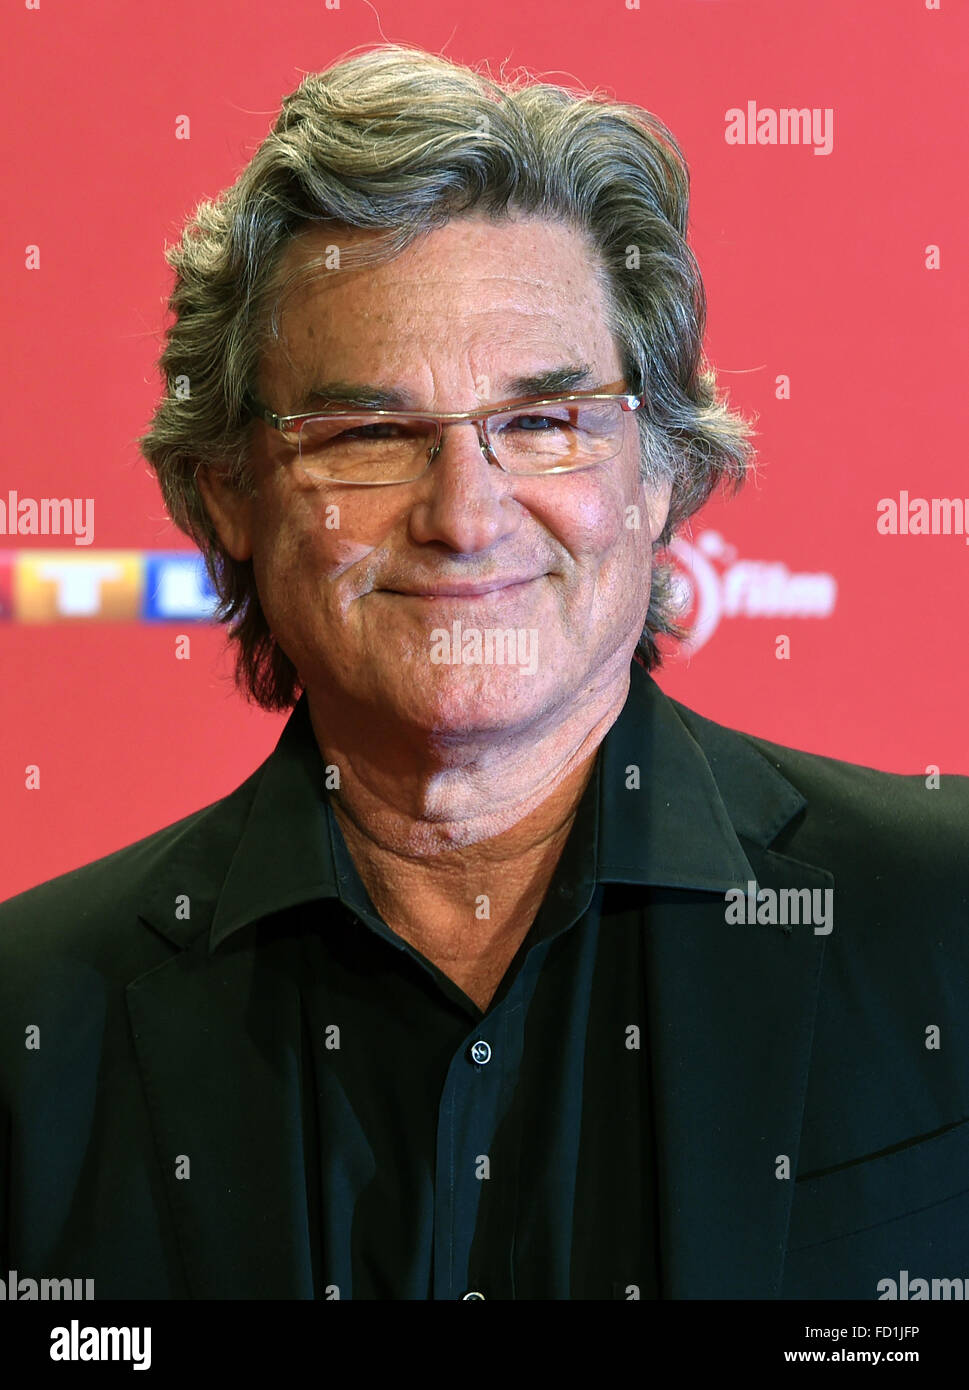 Berlin, Germany. 26th Jan, 2016. US American actor Kurt Russell arrives for the German premiere of the film 'The Hateful 8' at the Zoo Palast cinema in Berlin, Germany, 26 January 2016. Photo: Jens Kalaene/dpa/Alamy Live News Stock Photo